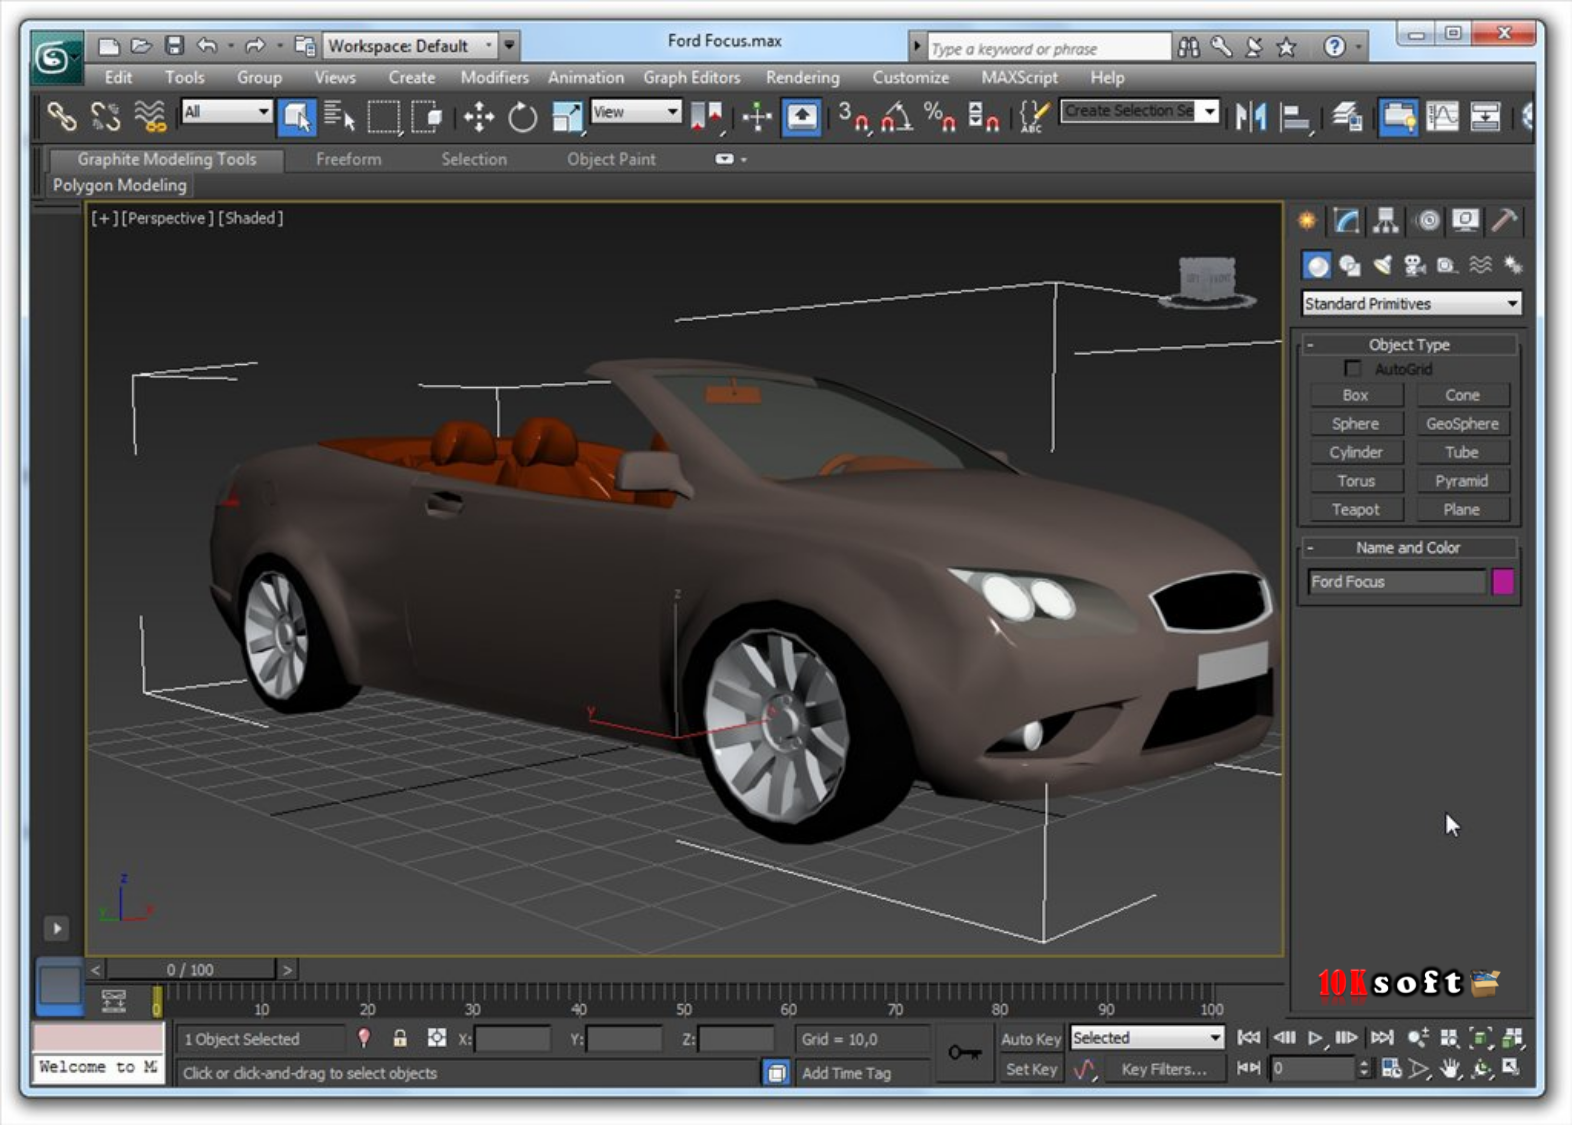 3ds max 2014 software free download full version with crack